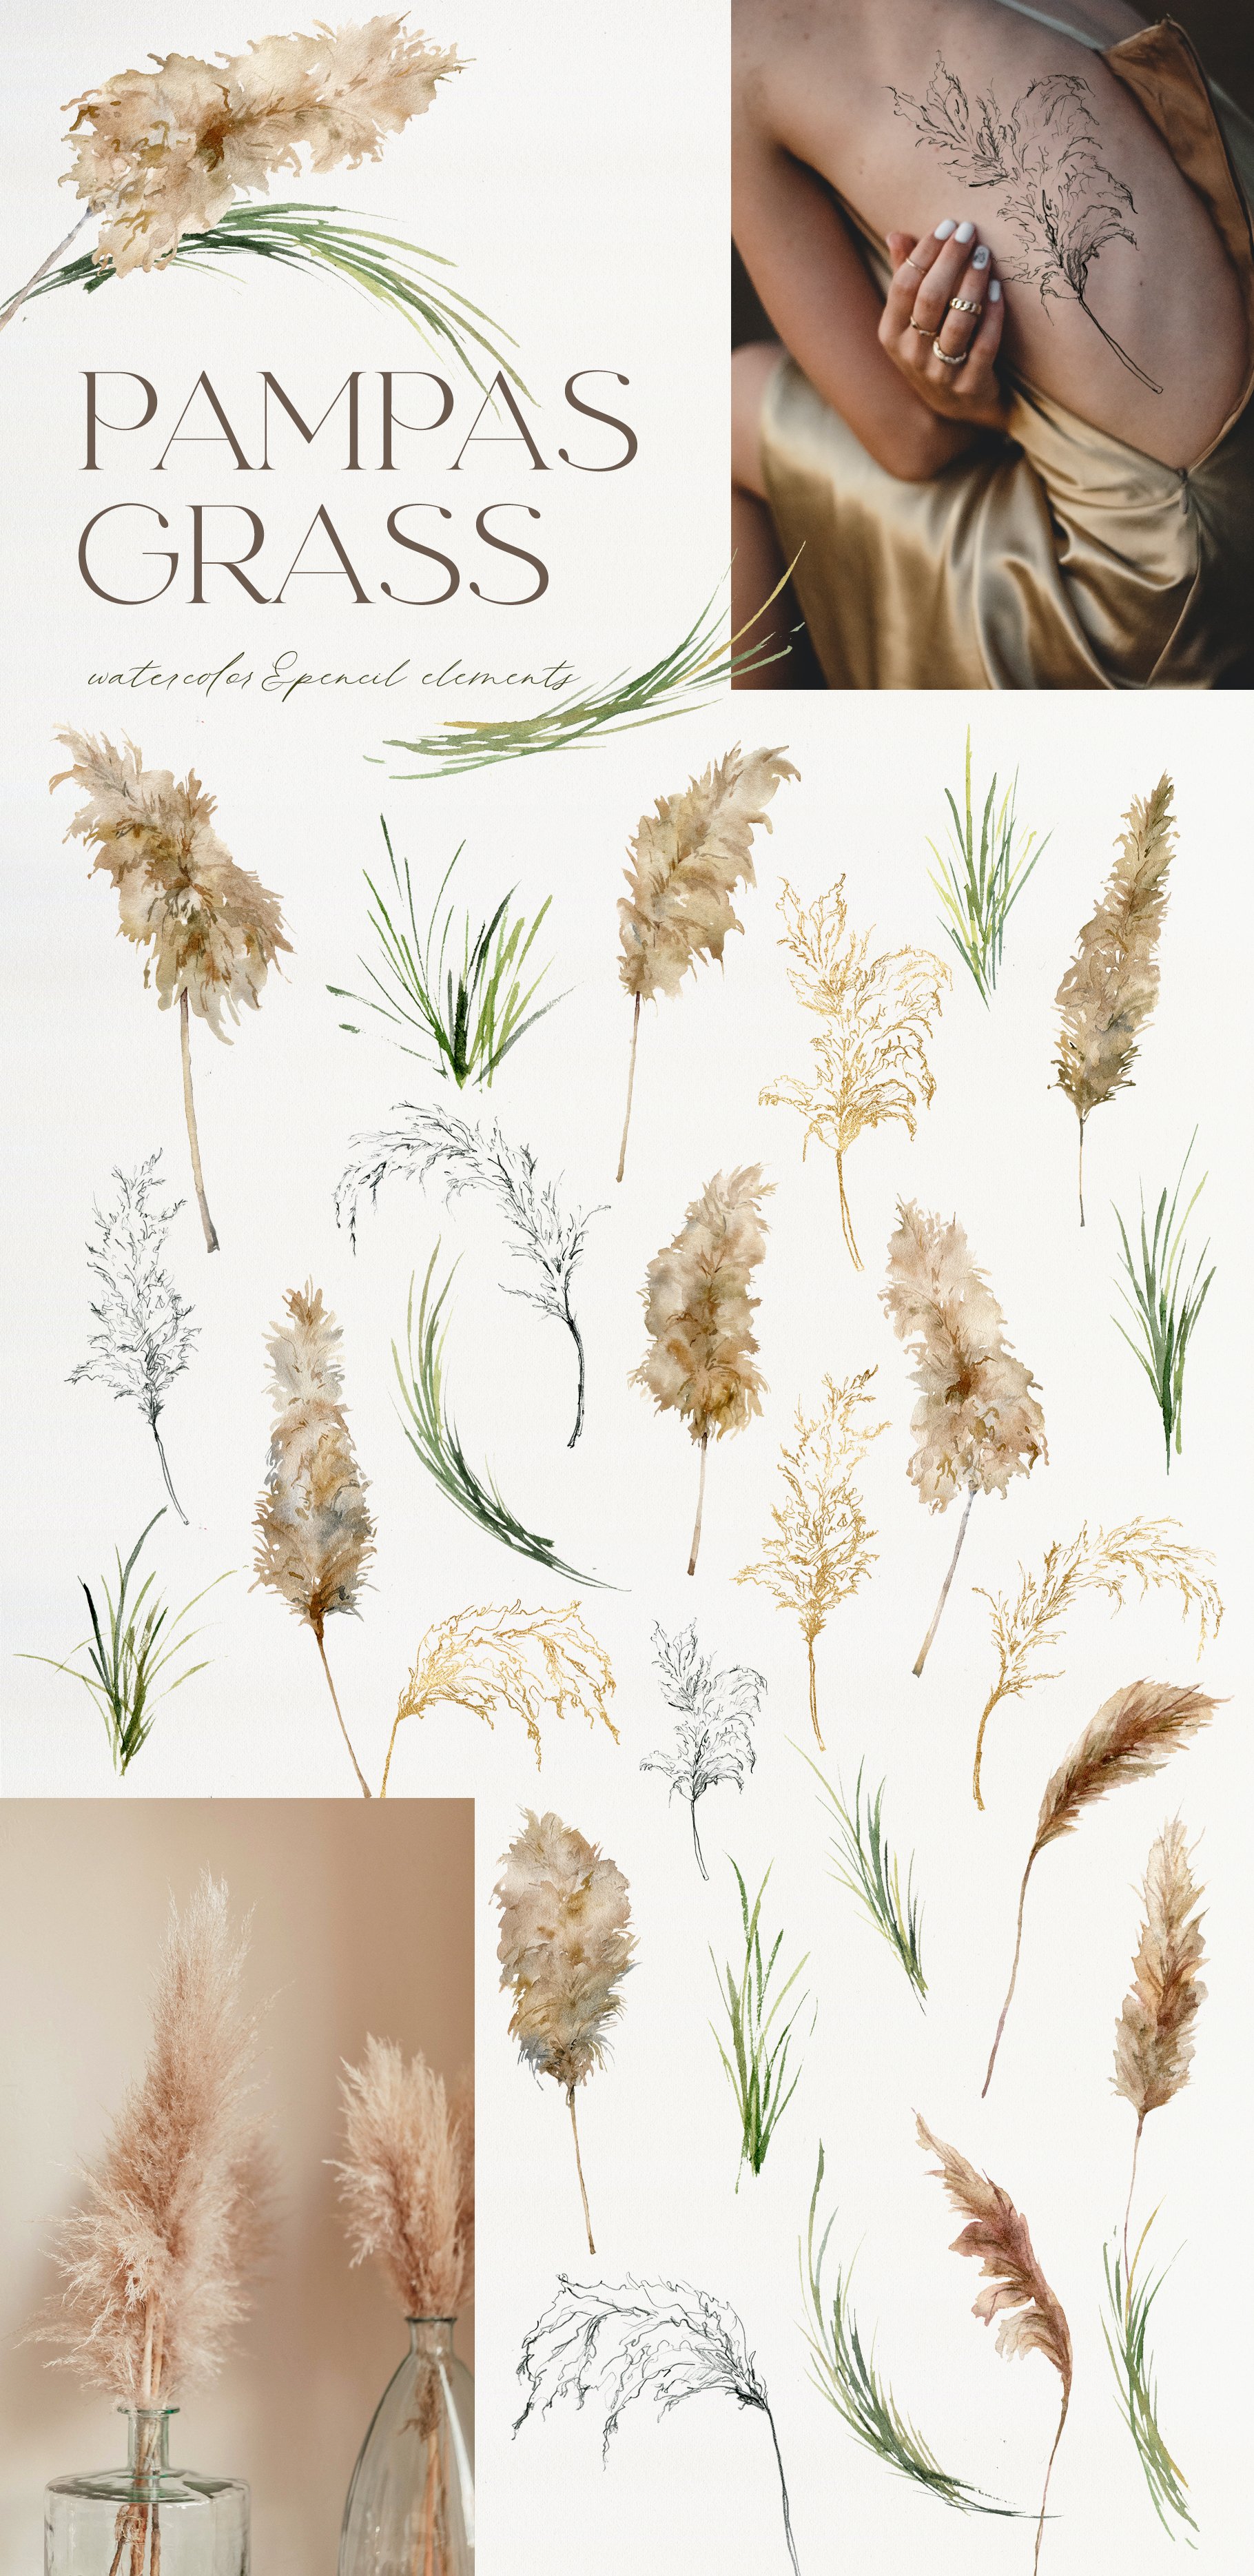 Collage of photos of flowers and grass.